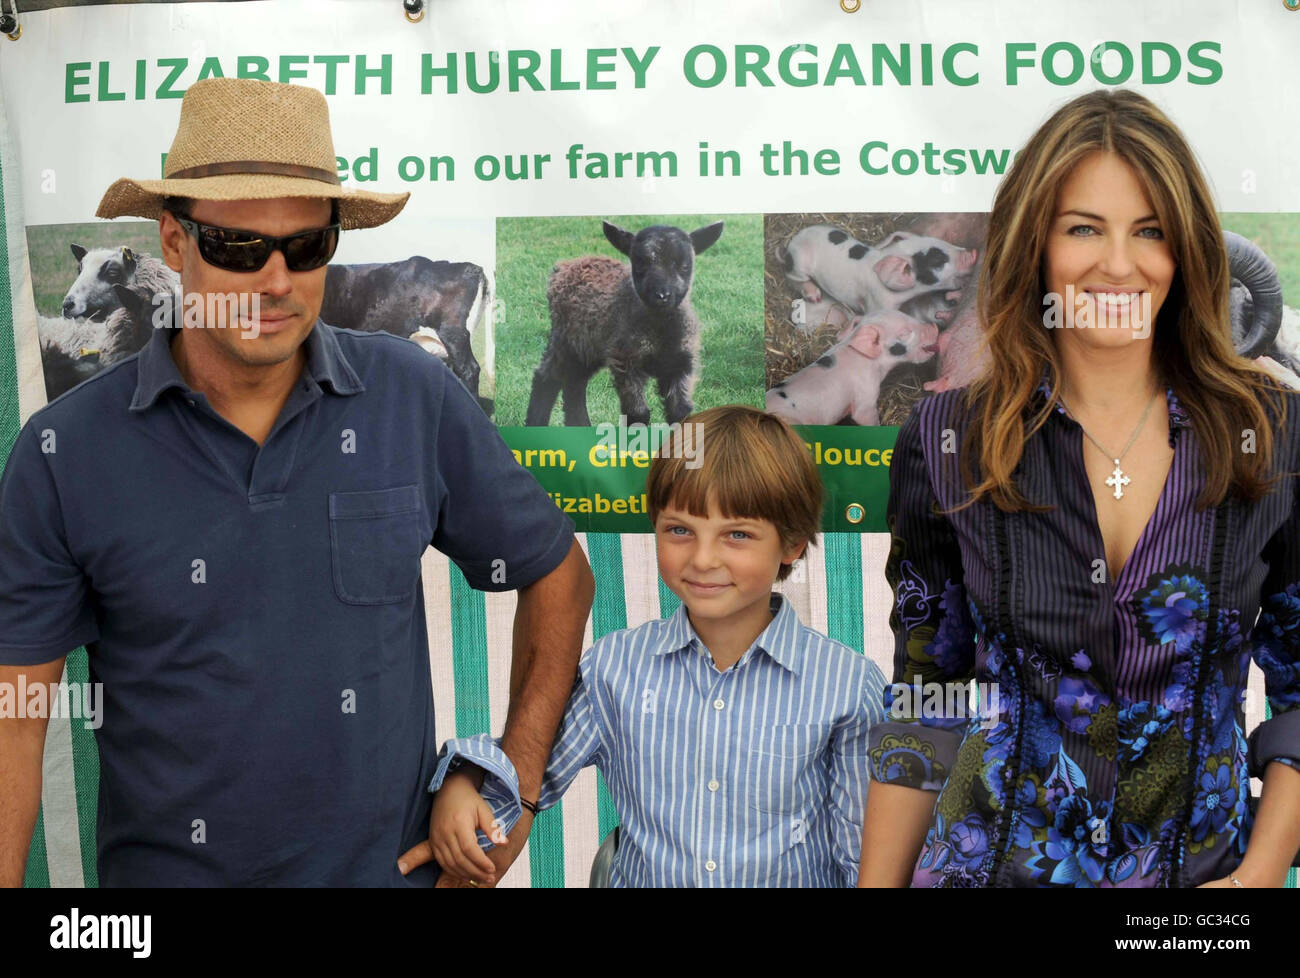 Elizabeth Hurley with husband Arun Nayar and son Damian, 7, promoting her organic food range, Elizabeth Hurley Foods, on a stall at Cirencester Farmers Market. Stock Photo